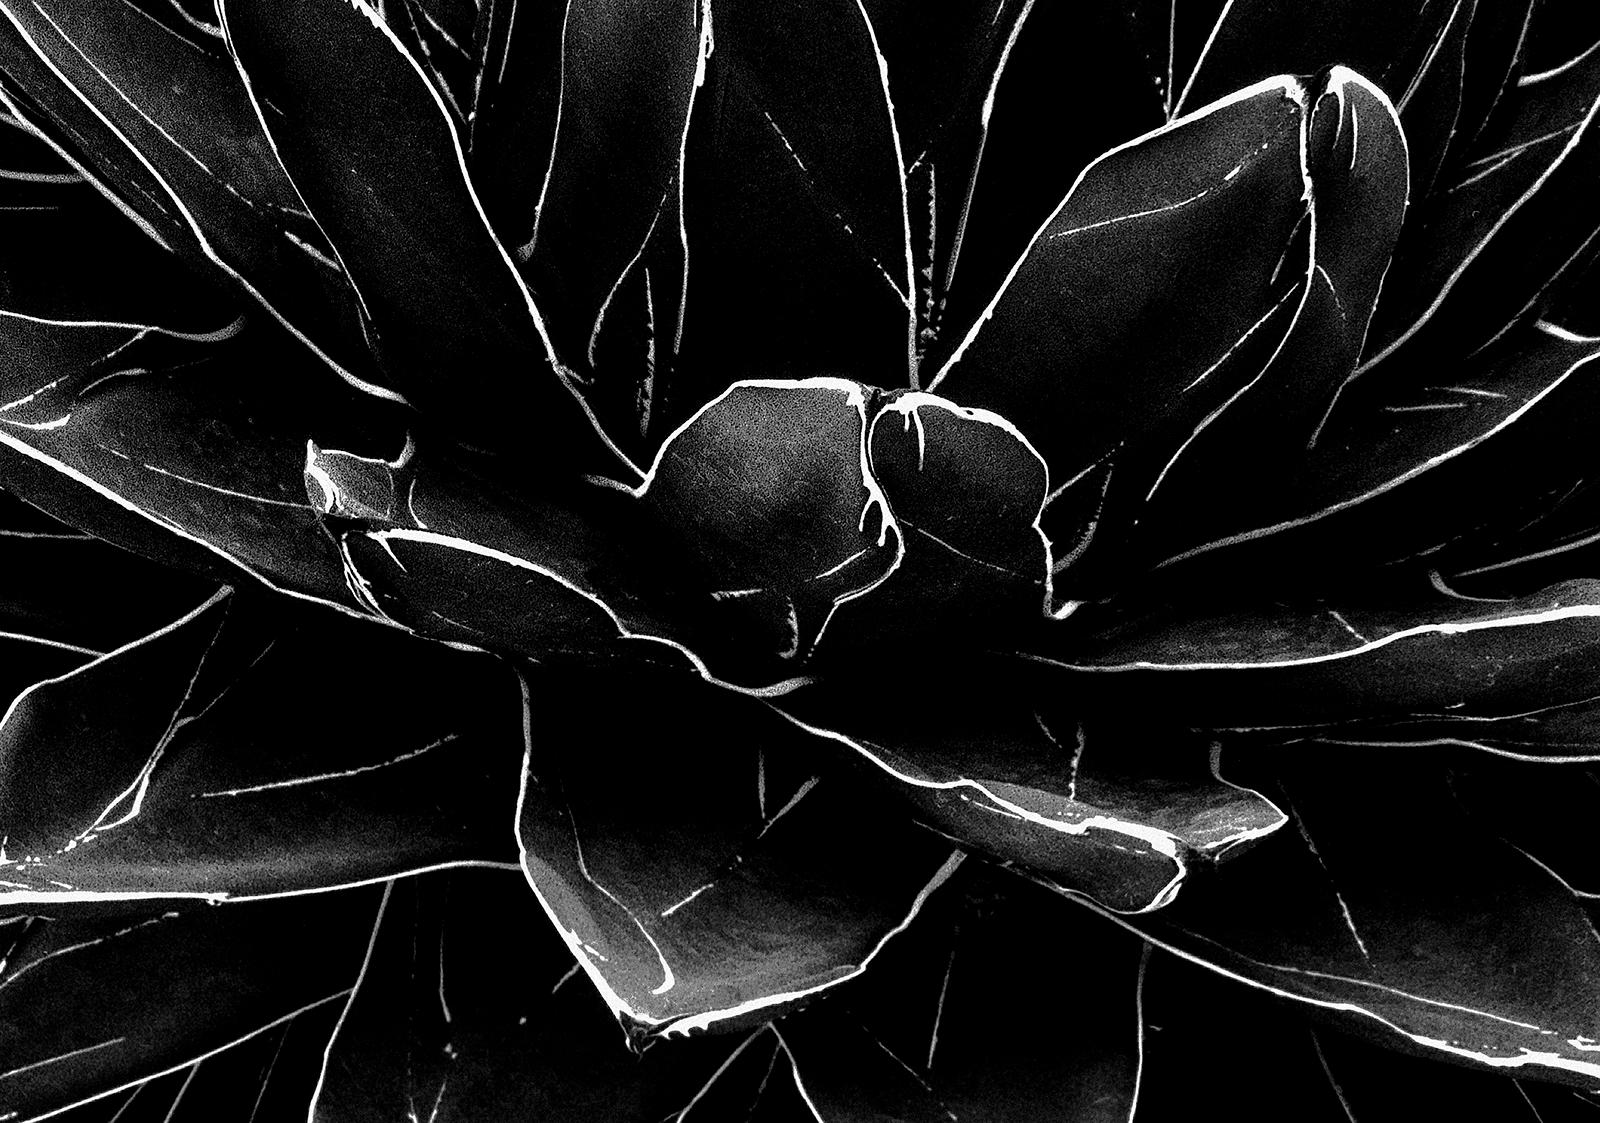 Cactus-Signed limited edition still life print, Black, Nature Plant close-up - Photograph by Ian Sanderson